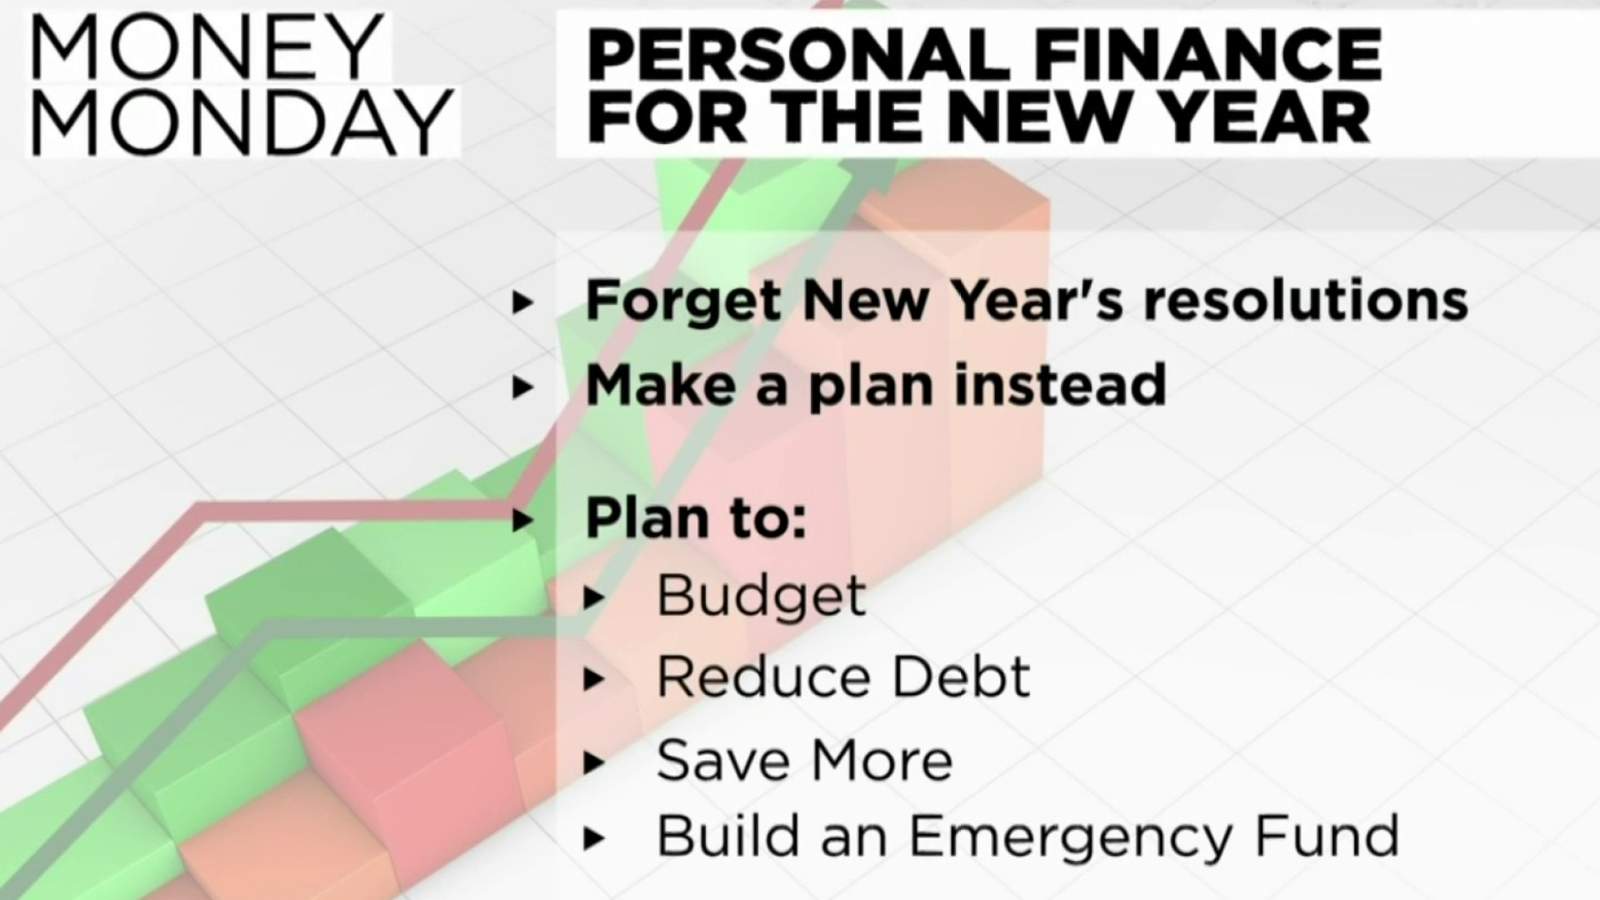 Money Monday: Personal finance tips for the new year